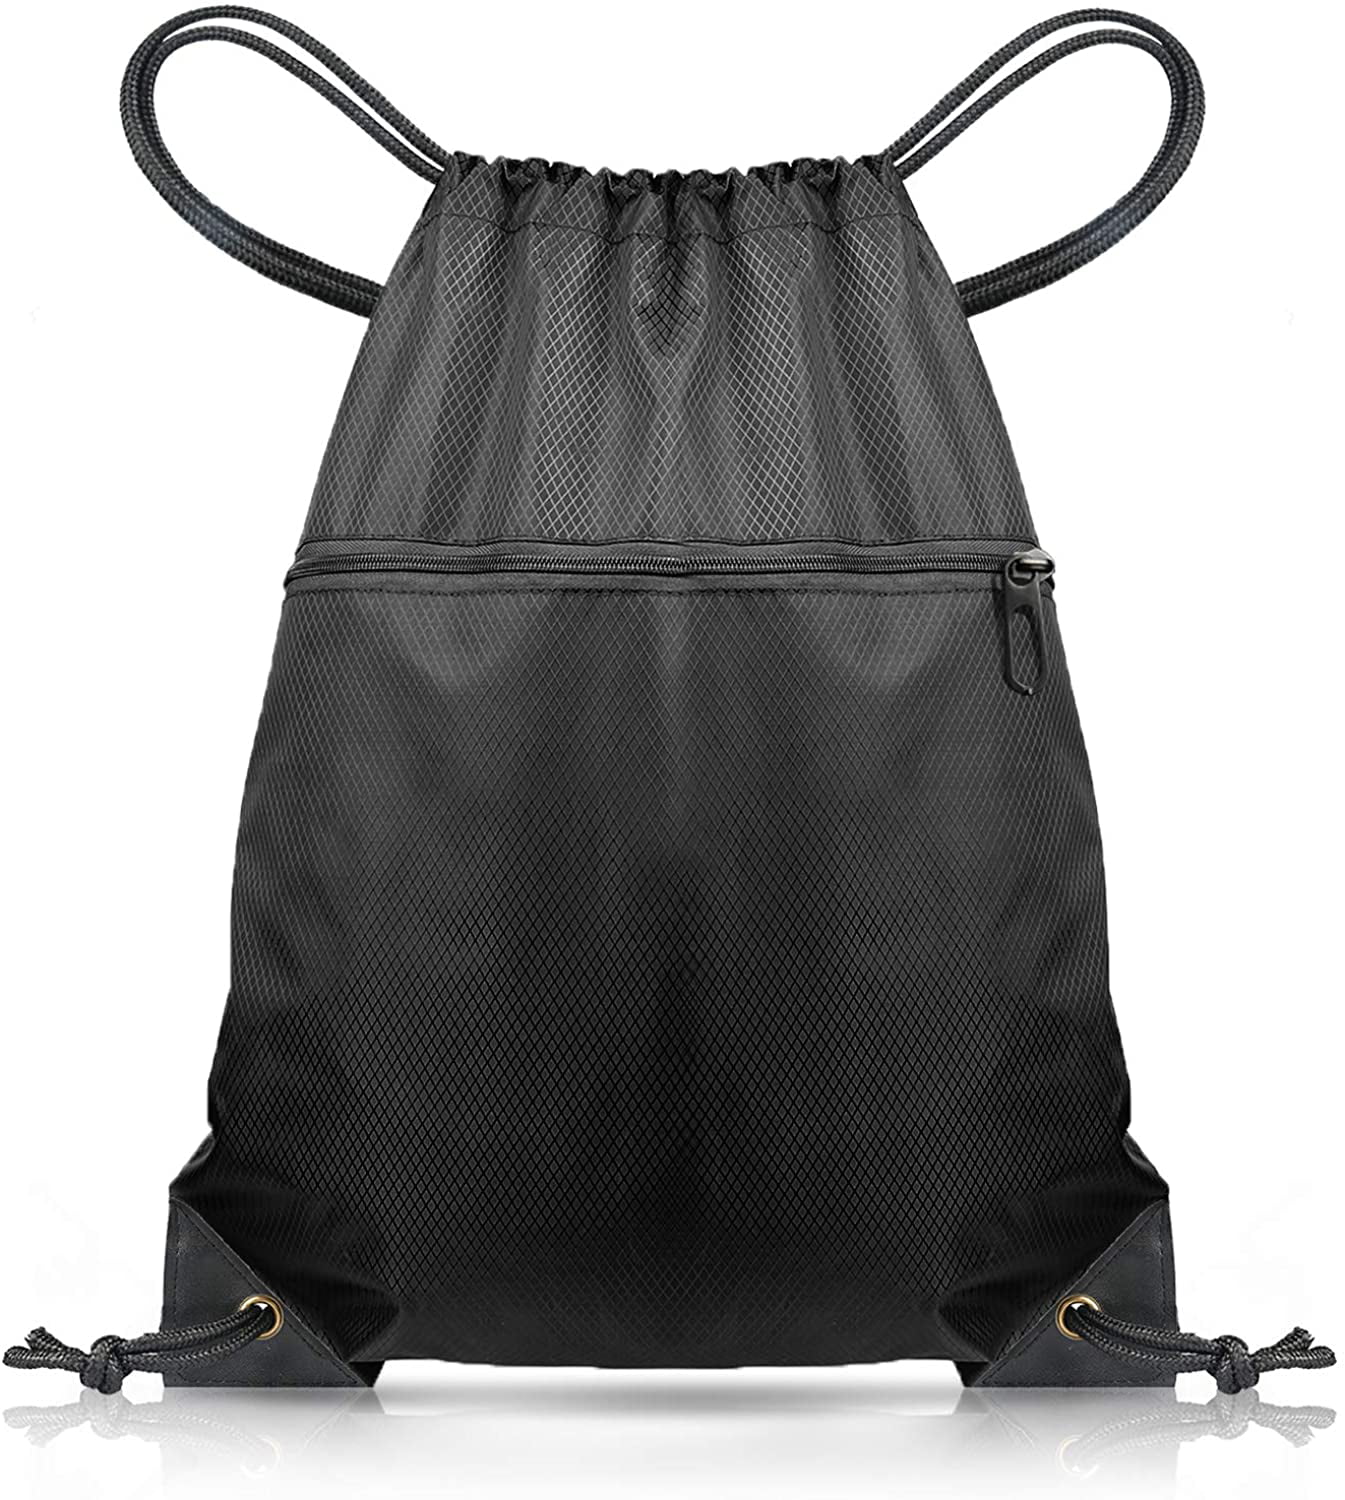 Double Sturdy Drawstring Bag With Pockets Waterproof Gym Sports Large Backpack 